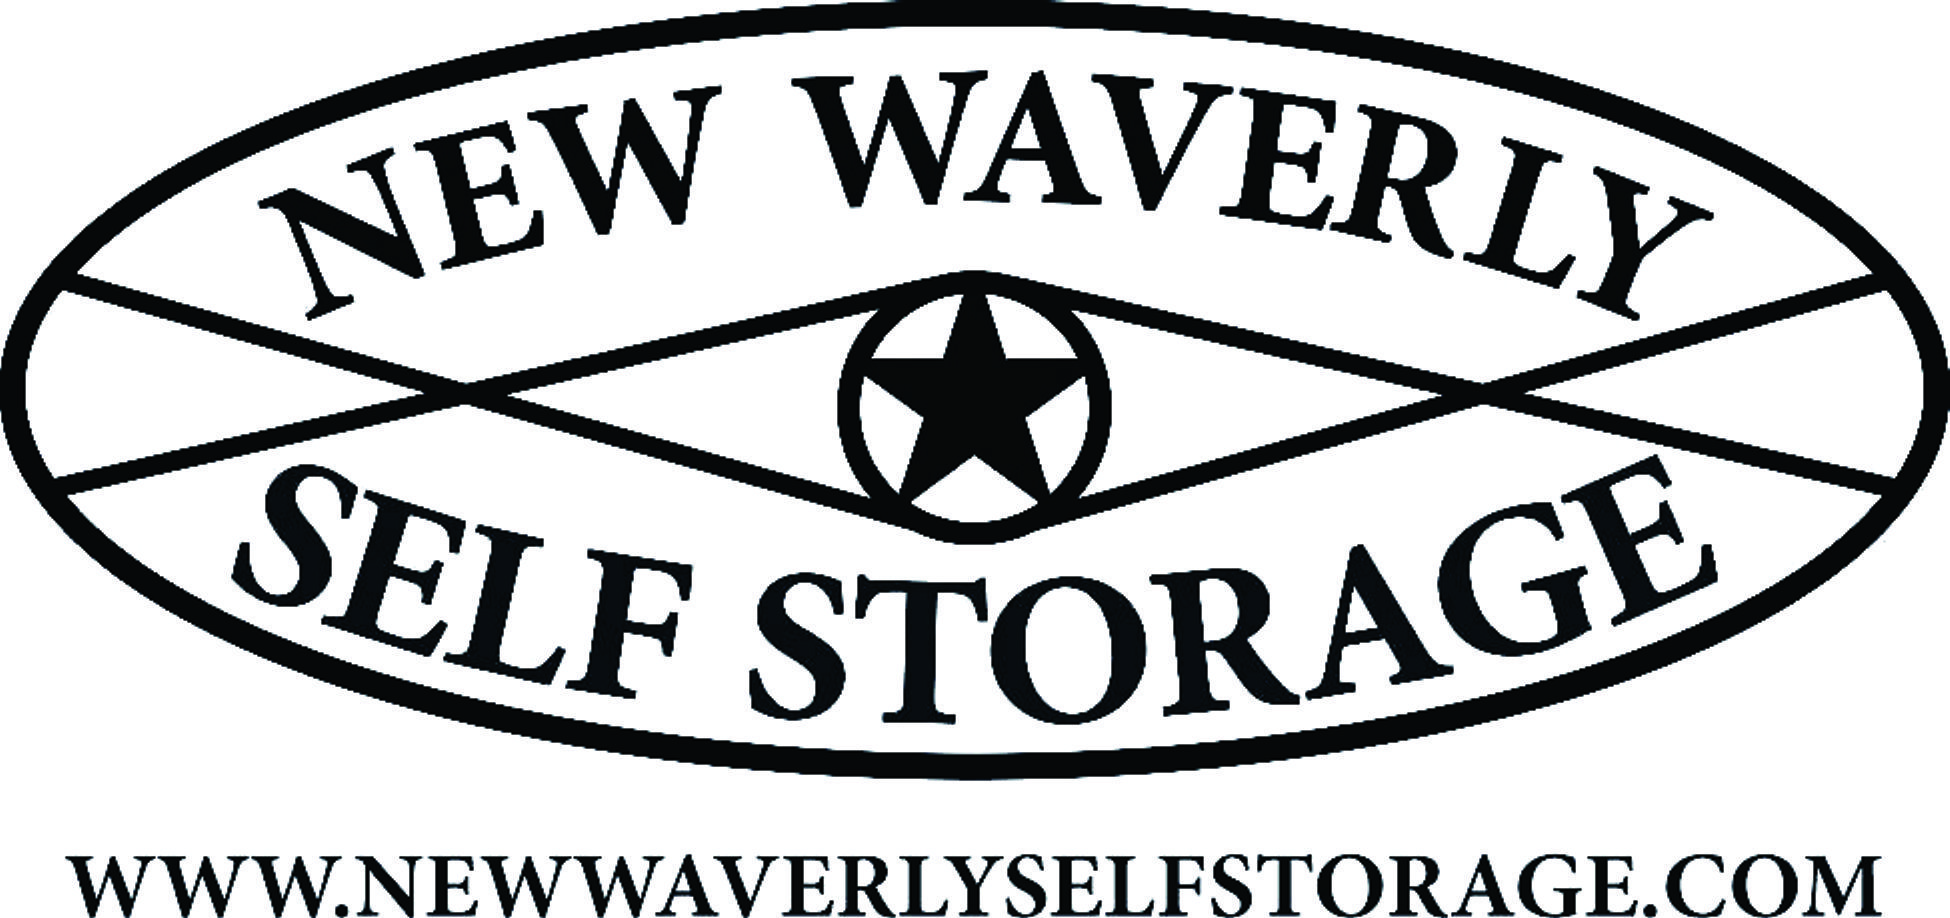 New Waverly, TX Climate-Controlled Storage Units